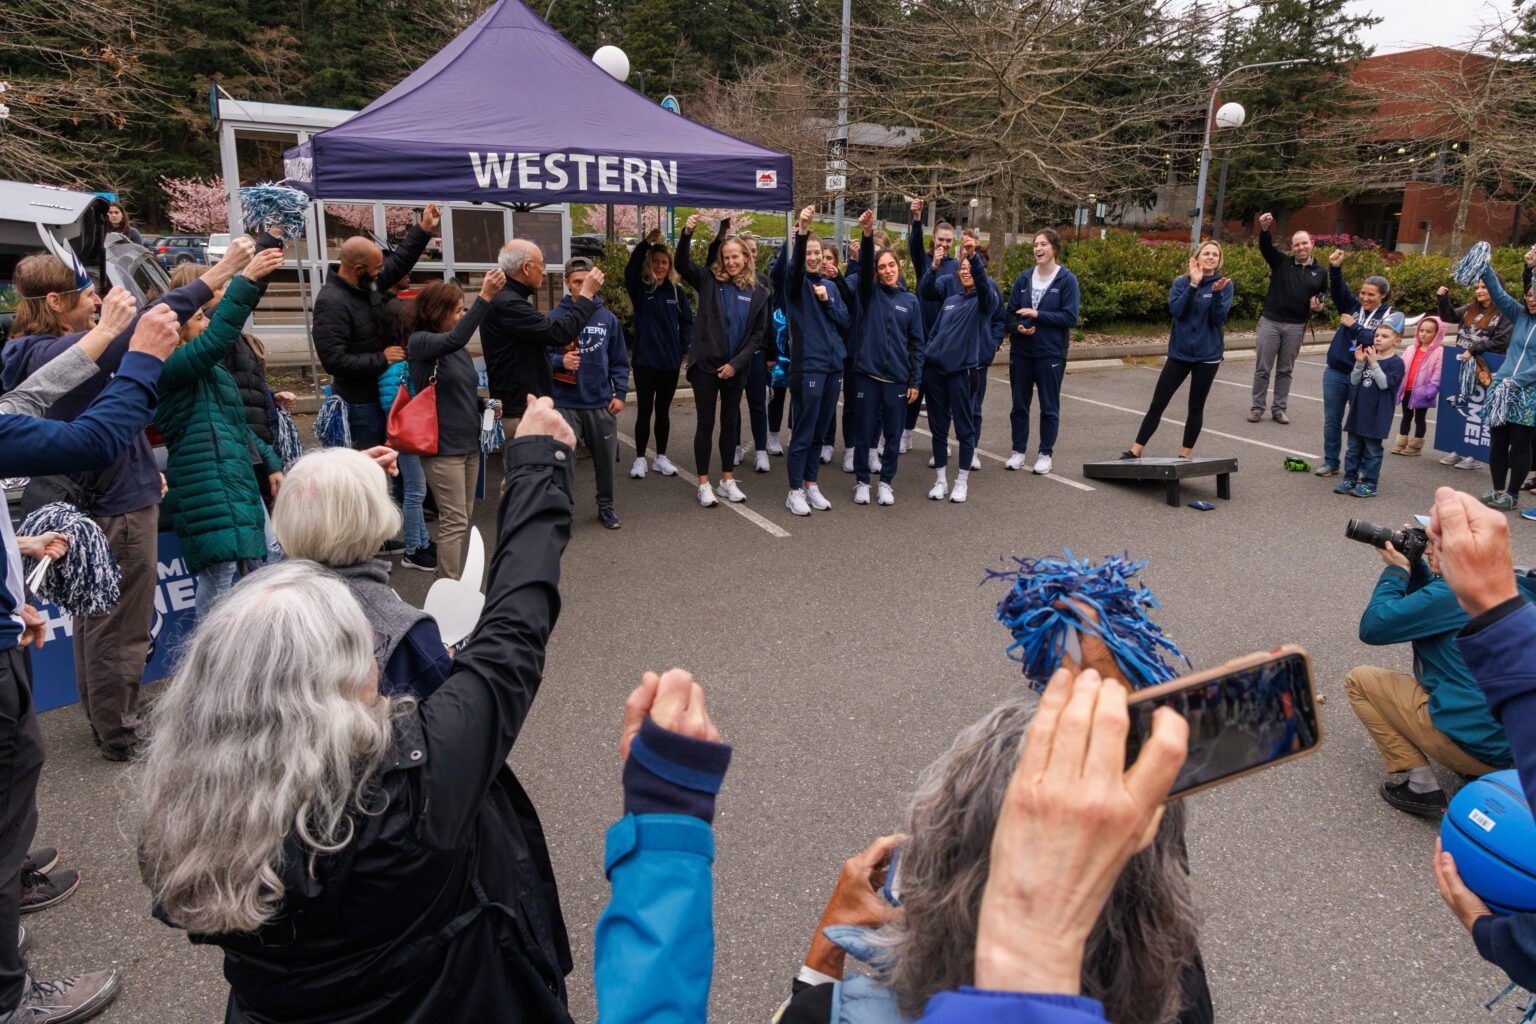 Fans raise an imaginary glass as they “toast” the Western Washington University women’s basketball team after their arrival home on March 26. The team finished in second place in the NCAA Division II women’s basketball national championship on Friday.